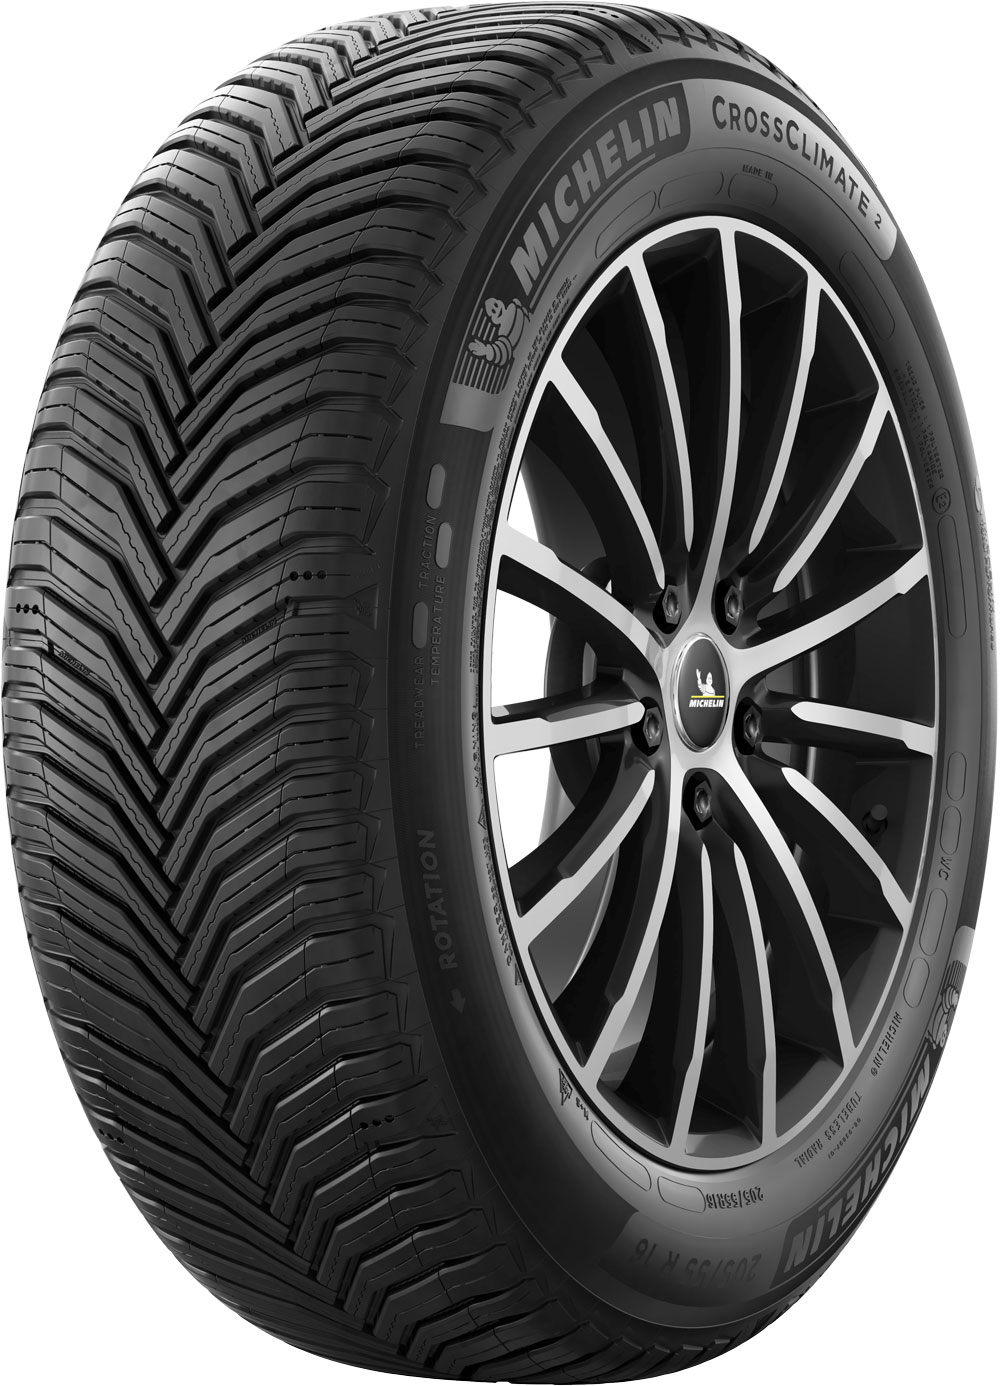 Anvelope jeep MICHELIN CROSSCLIMATE 2 XL XL FP 255/50 R19 107Y